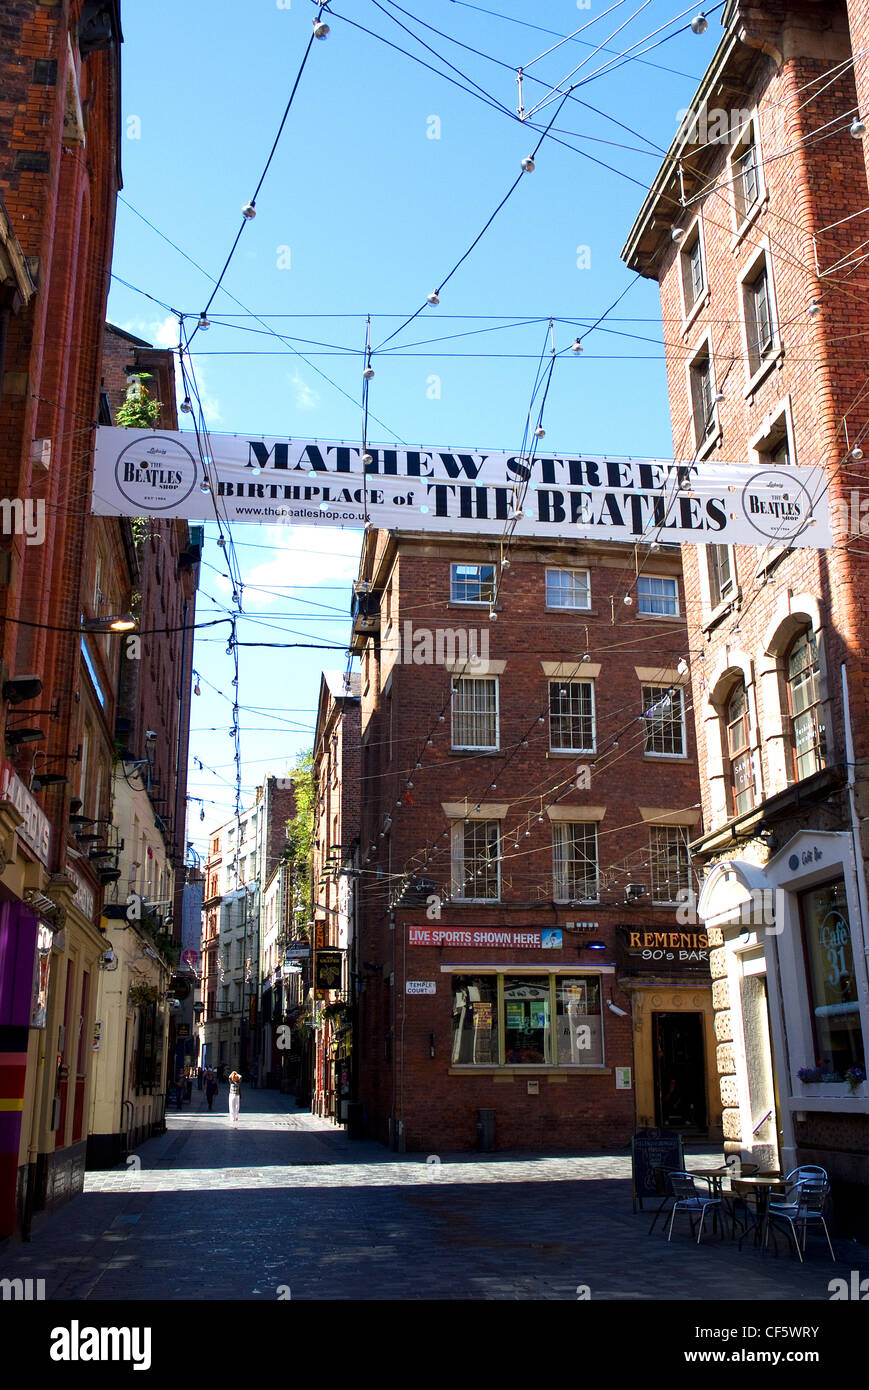 A banner over Mathew Street proclaiming it the birthplace of The Beatles. Stock Photo